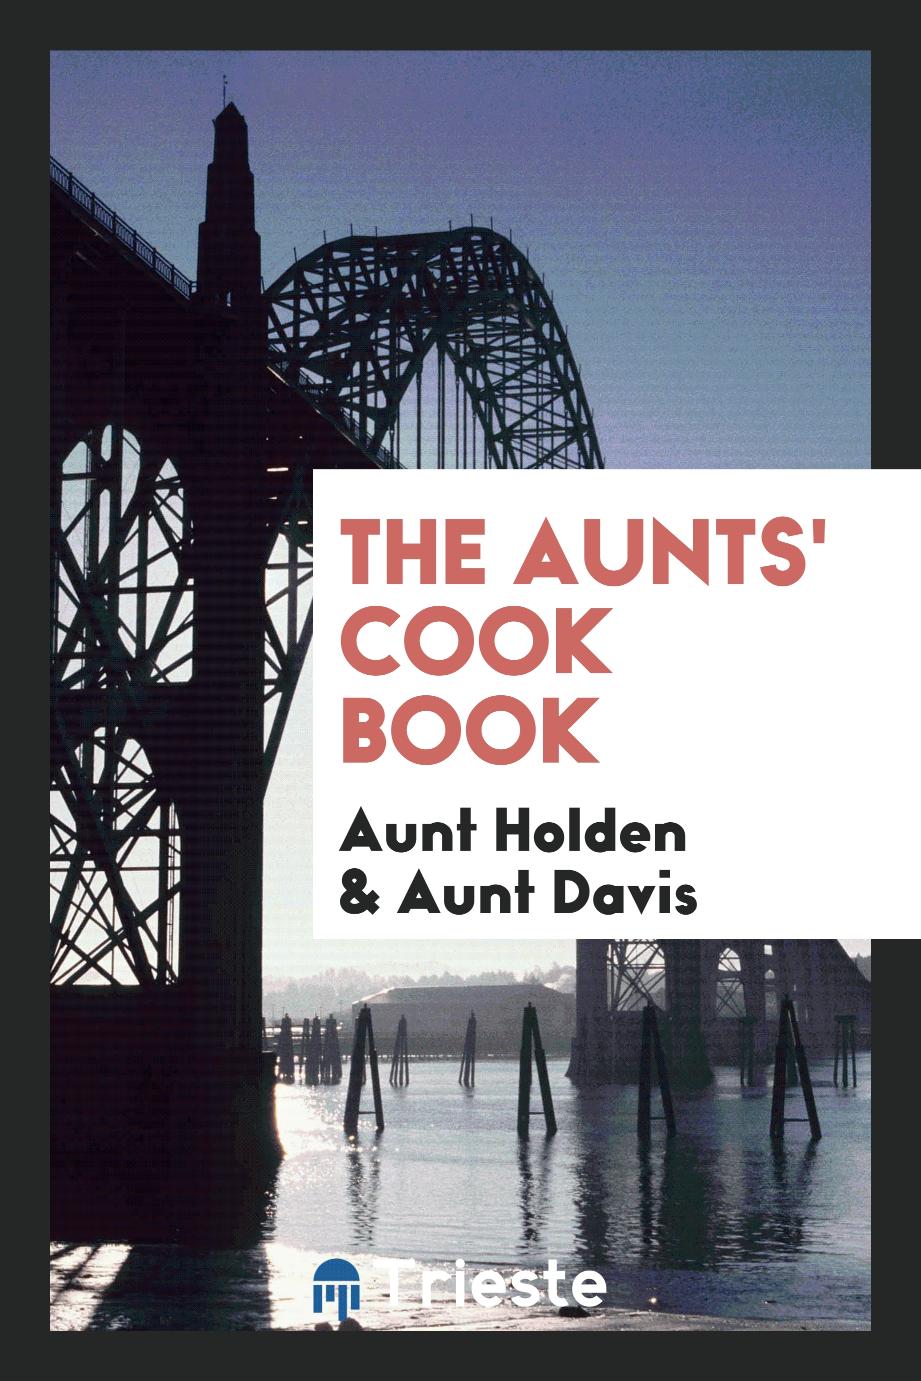 The Aunts' Cook Book